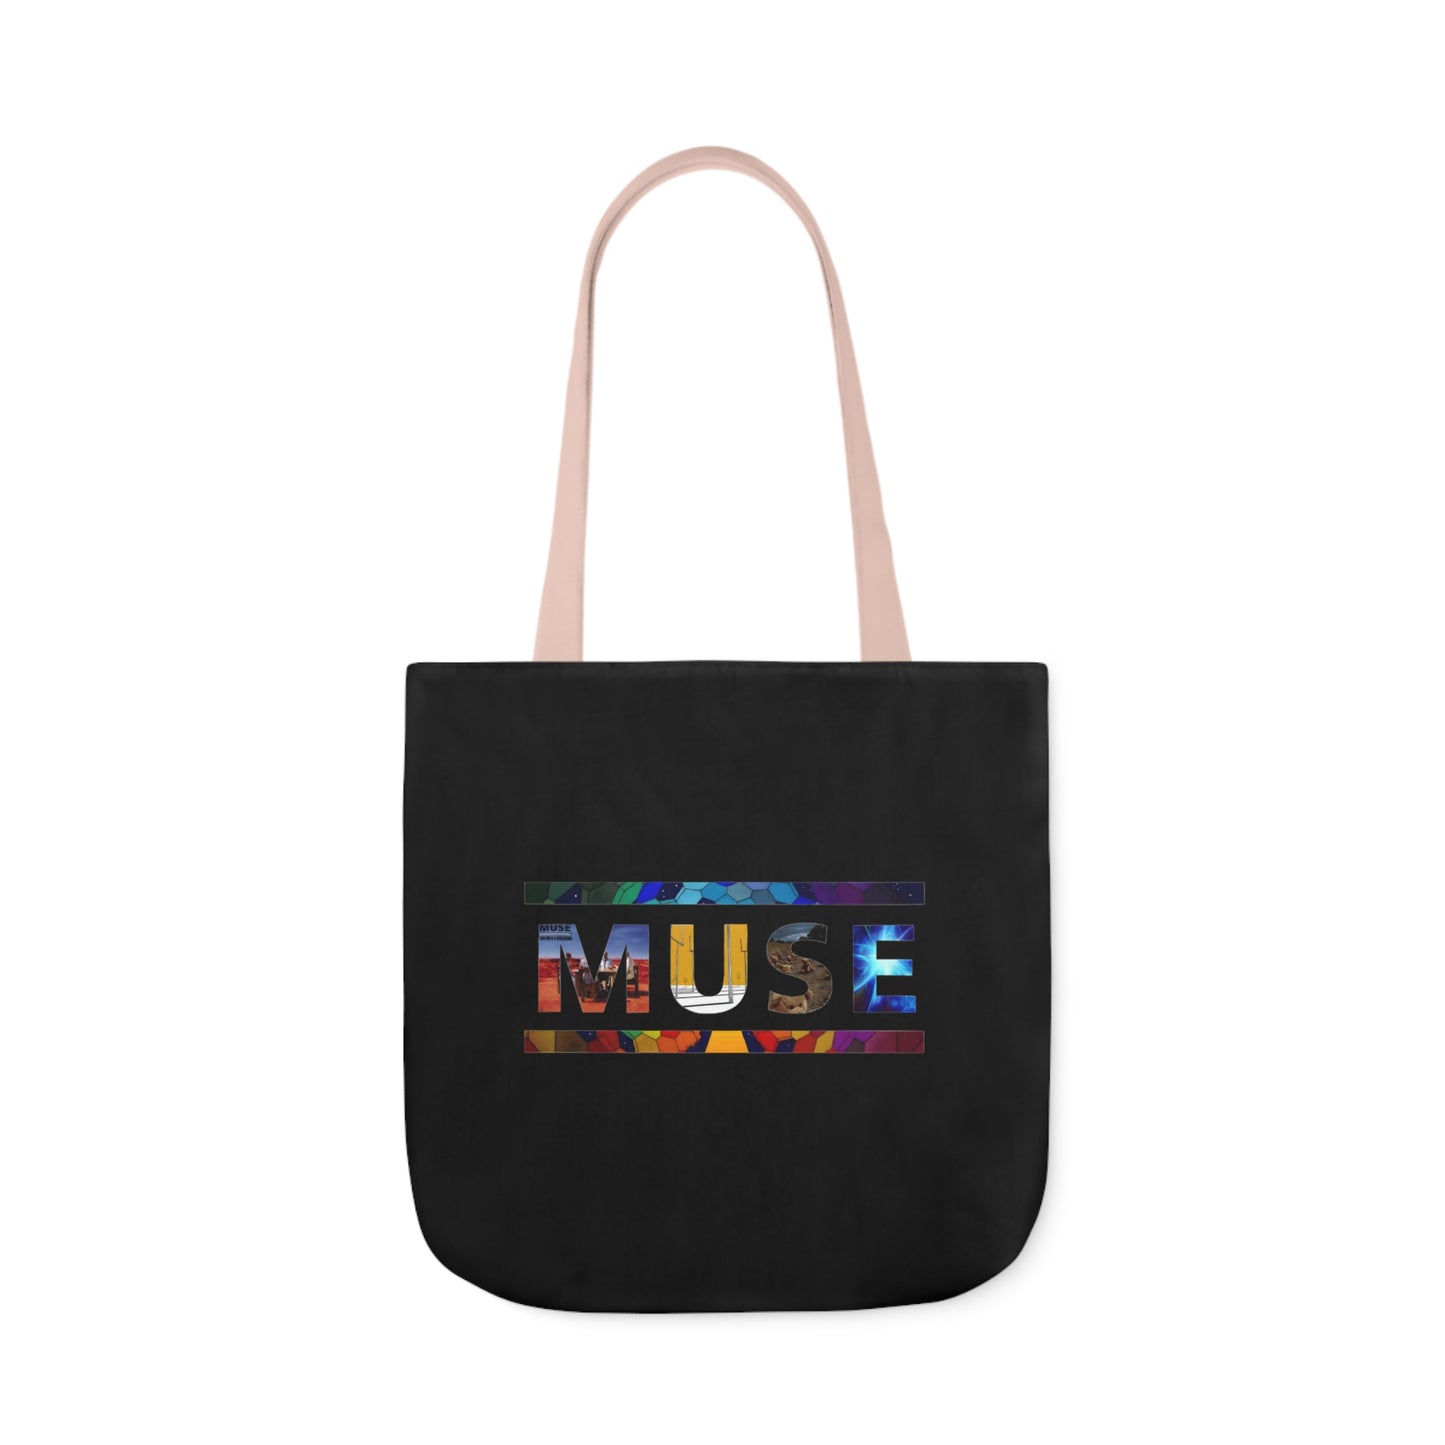 Muse Album Art Letters Polyester Canvas Tote Bag